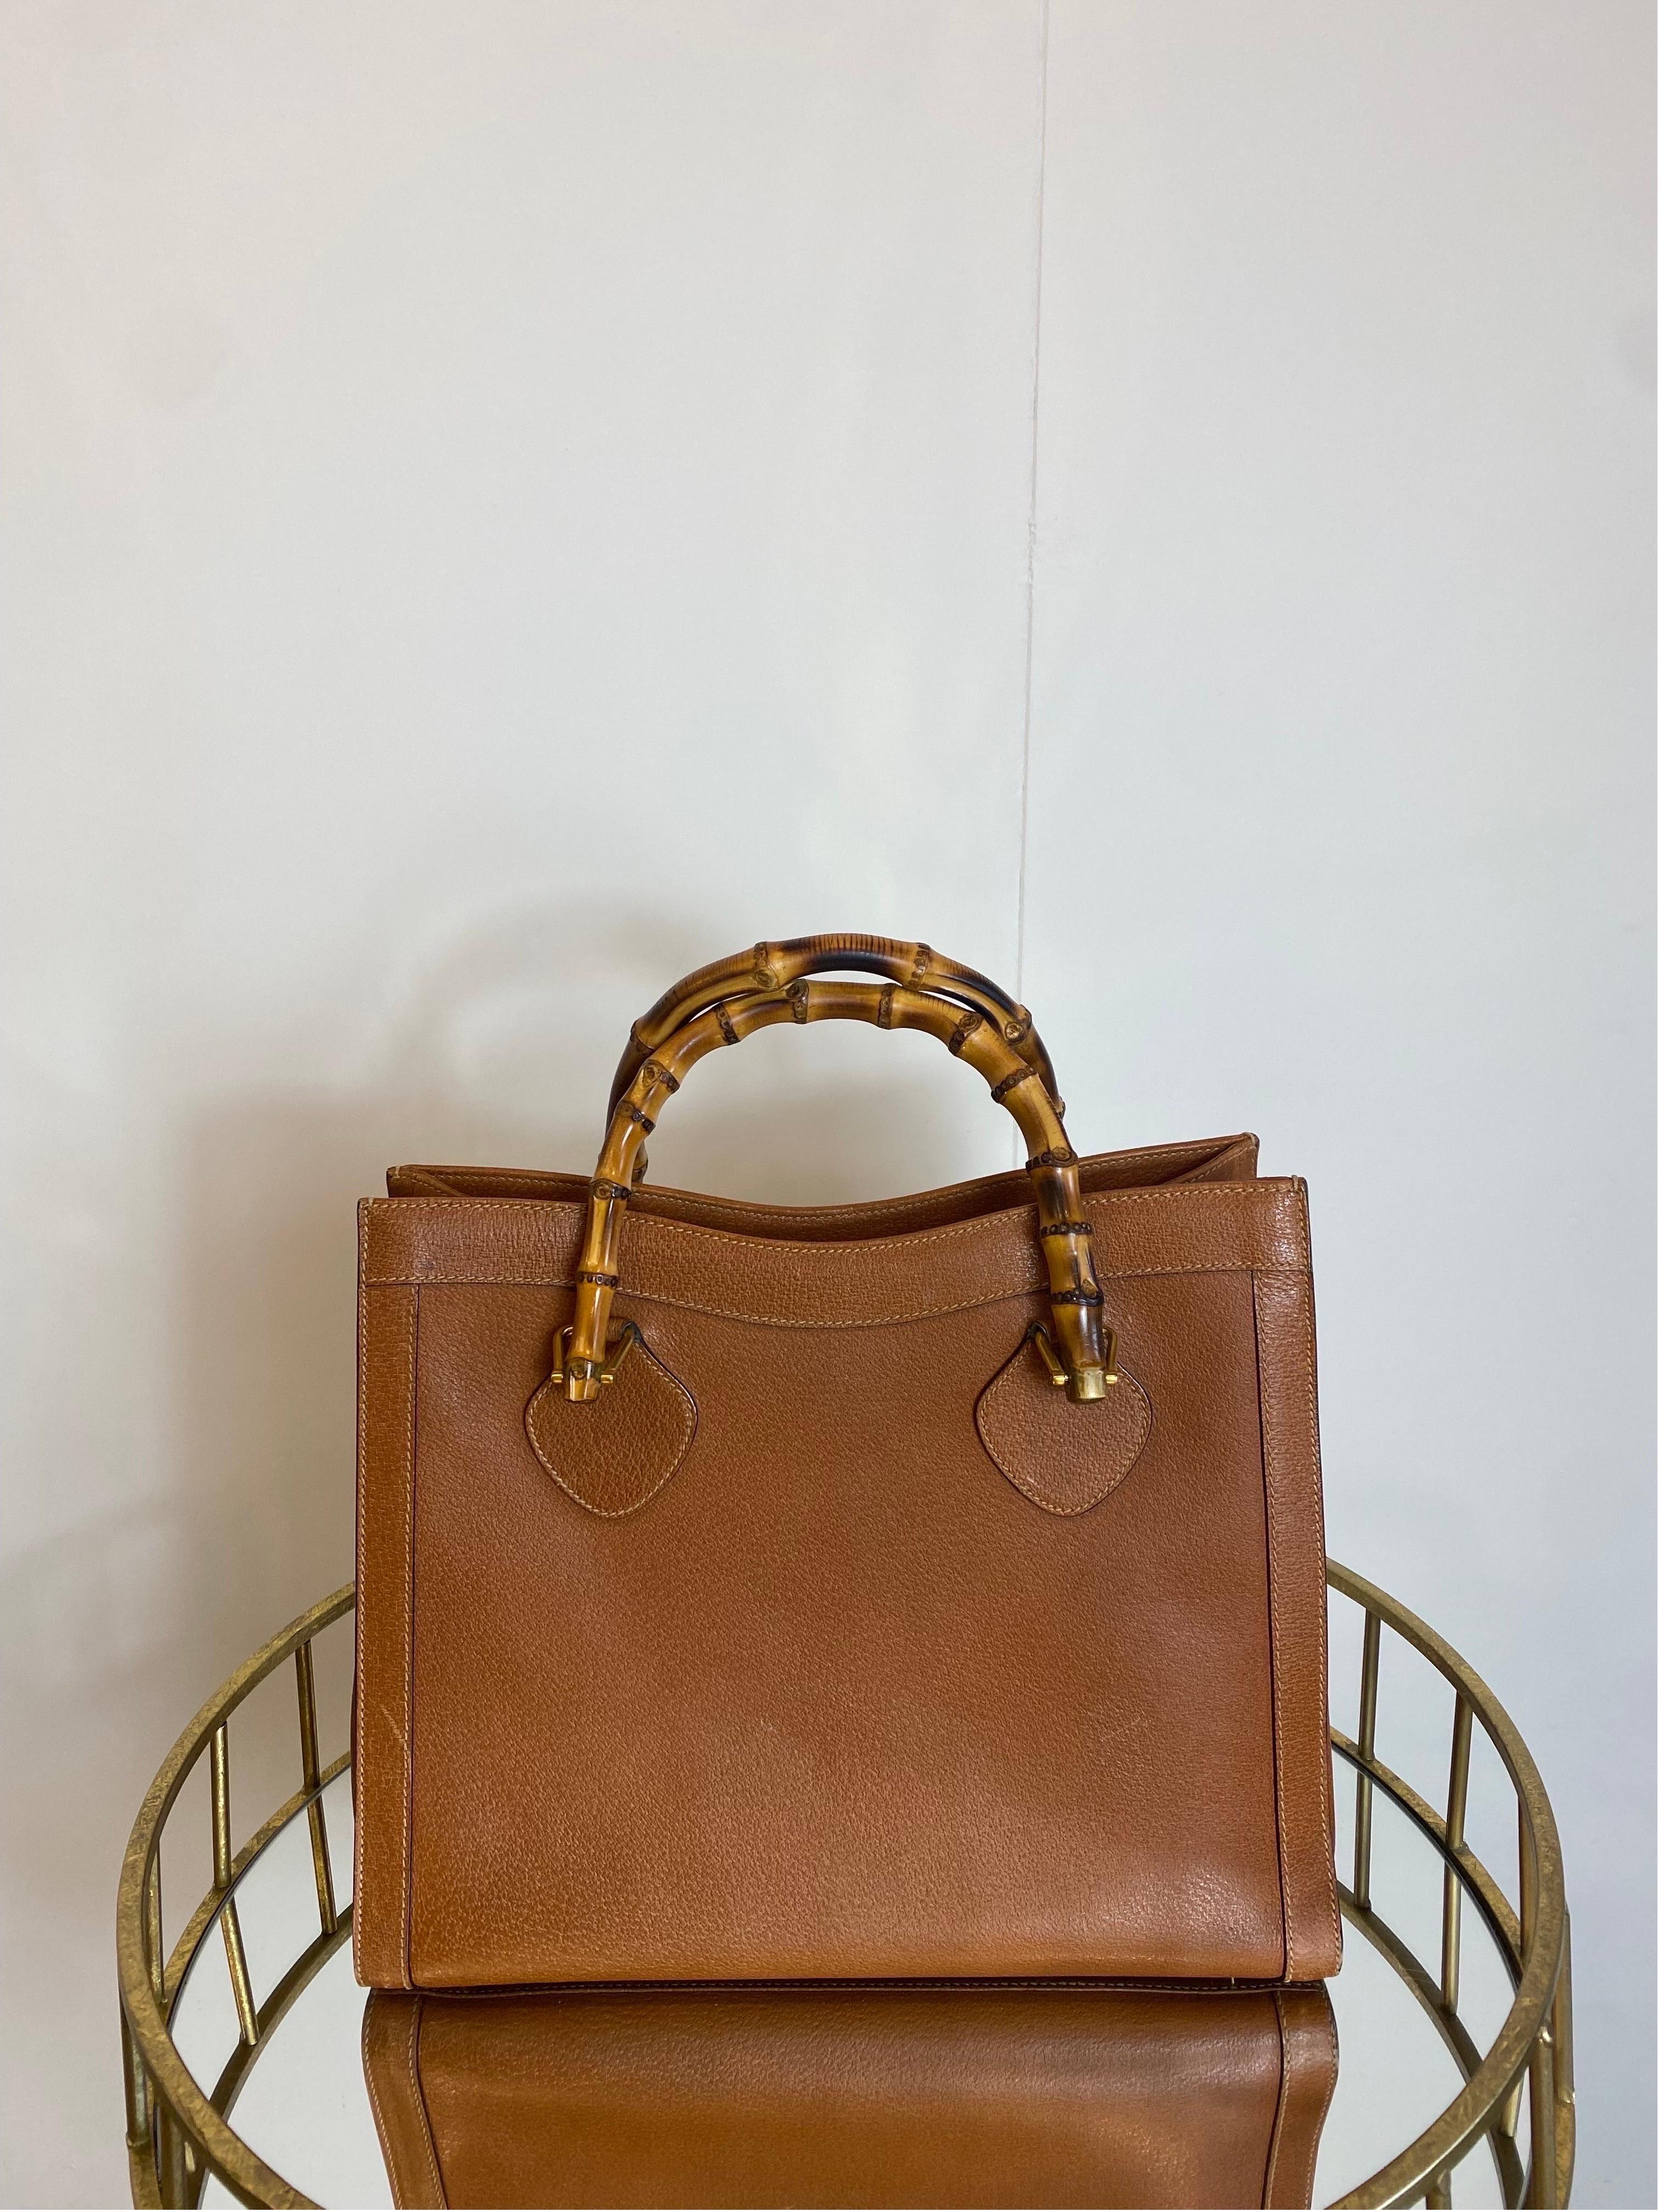 Gucci Diana Bamboo bag.
In brown leather and gold hardware.
Iconic bamboo handles.
Height 30 cm
Length 35 cm
Depth 14 cm
Excellent general condition, has some marks as shown in the photos.
The corners have some marks as shown in the photo.